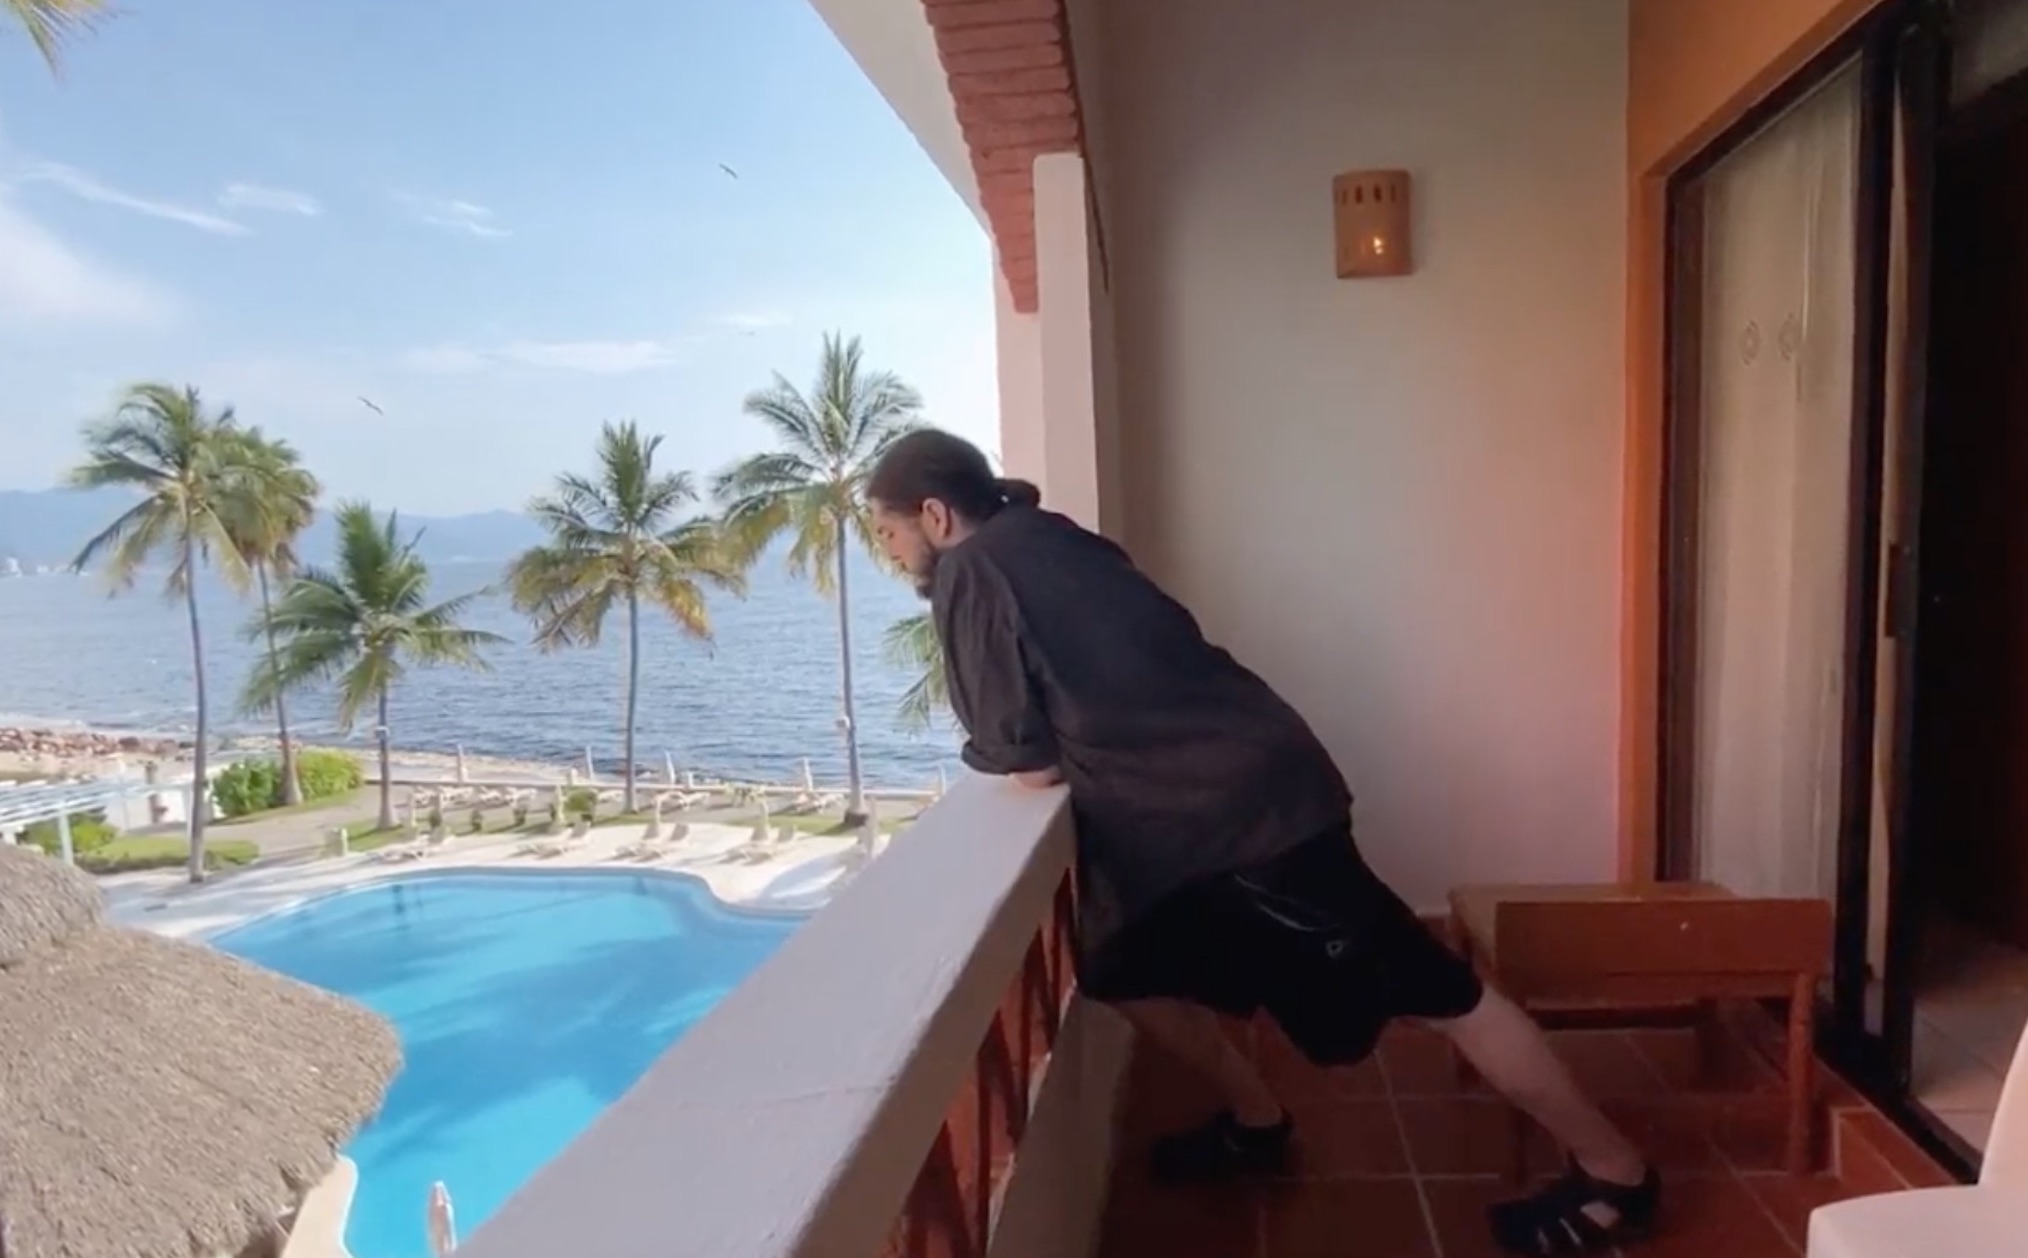 Andrew in Mexico, 90 Day Fiancé 